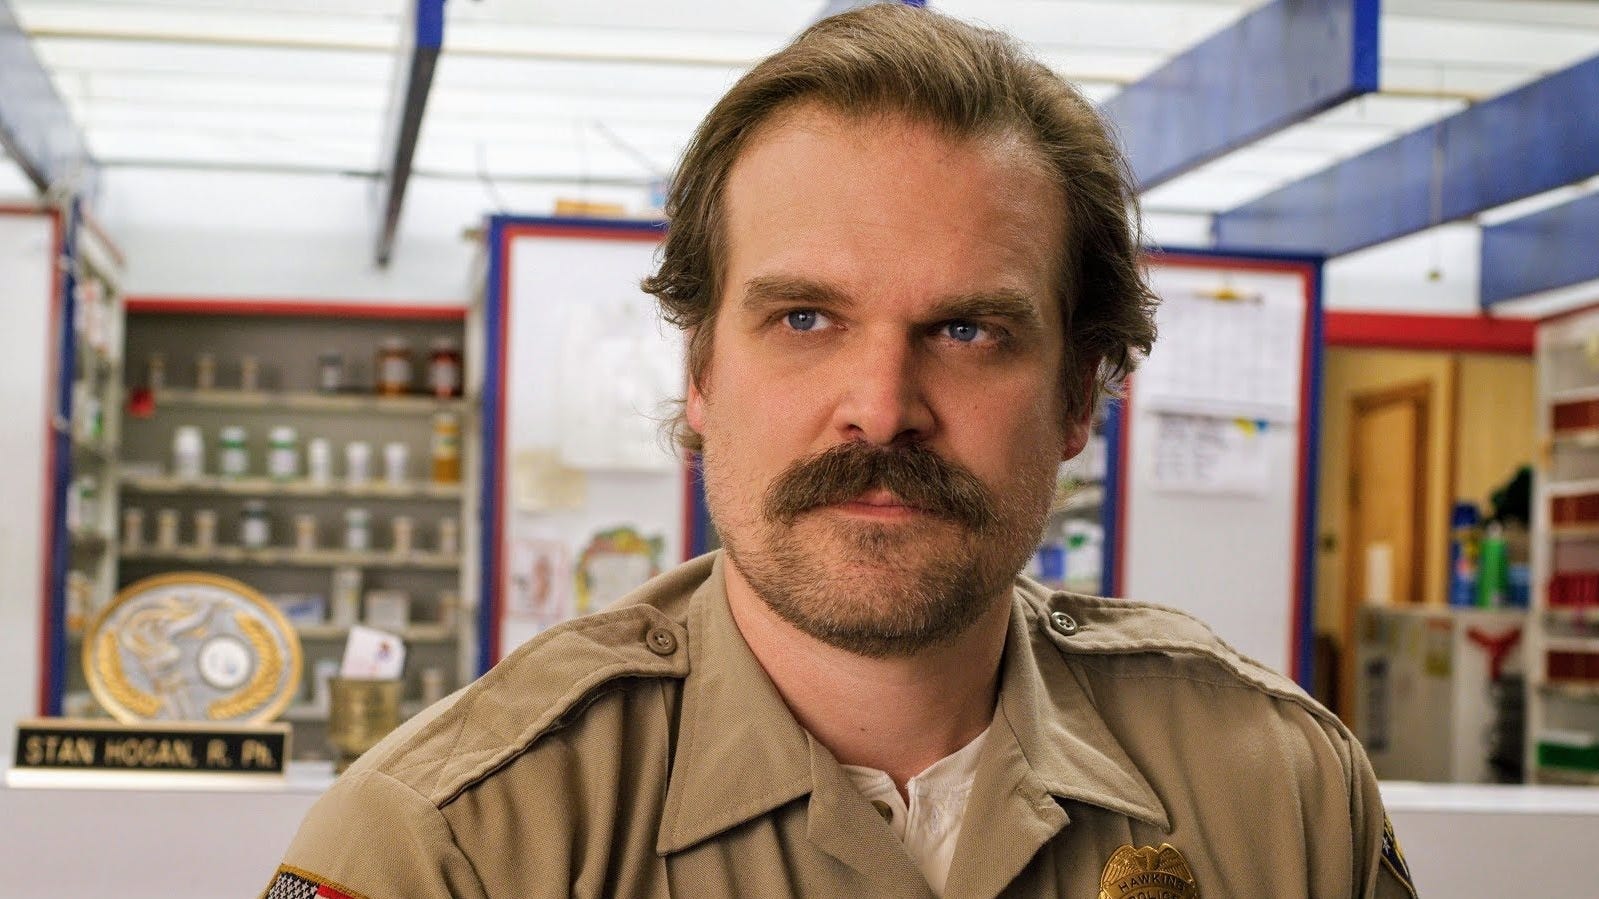 Stranger Things' will return, but role of Hawkins, Indiana, uncertain